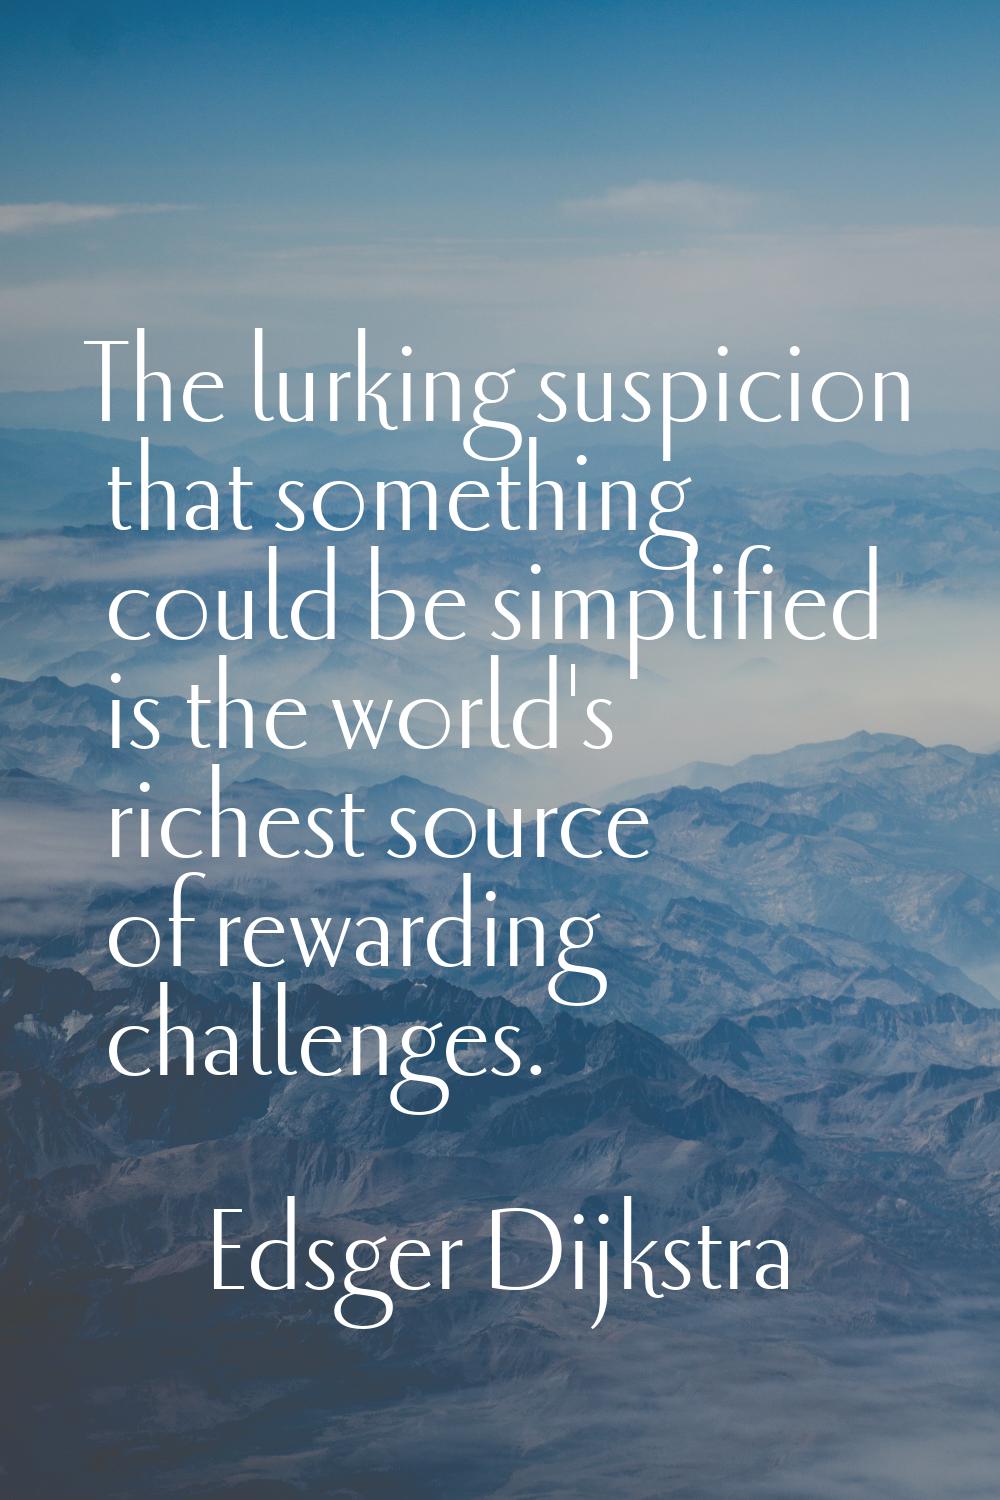 The lurking suspicion that something could be simplified is the world's richest source of rewarding